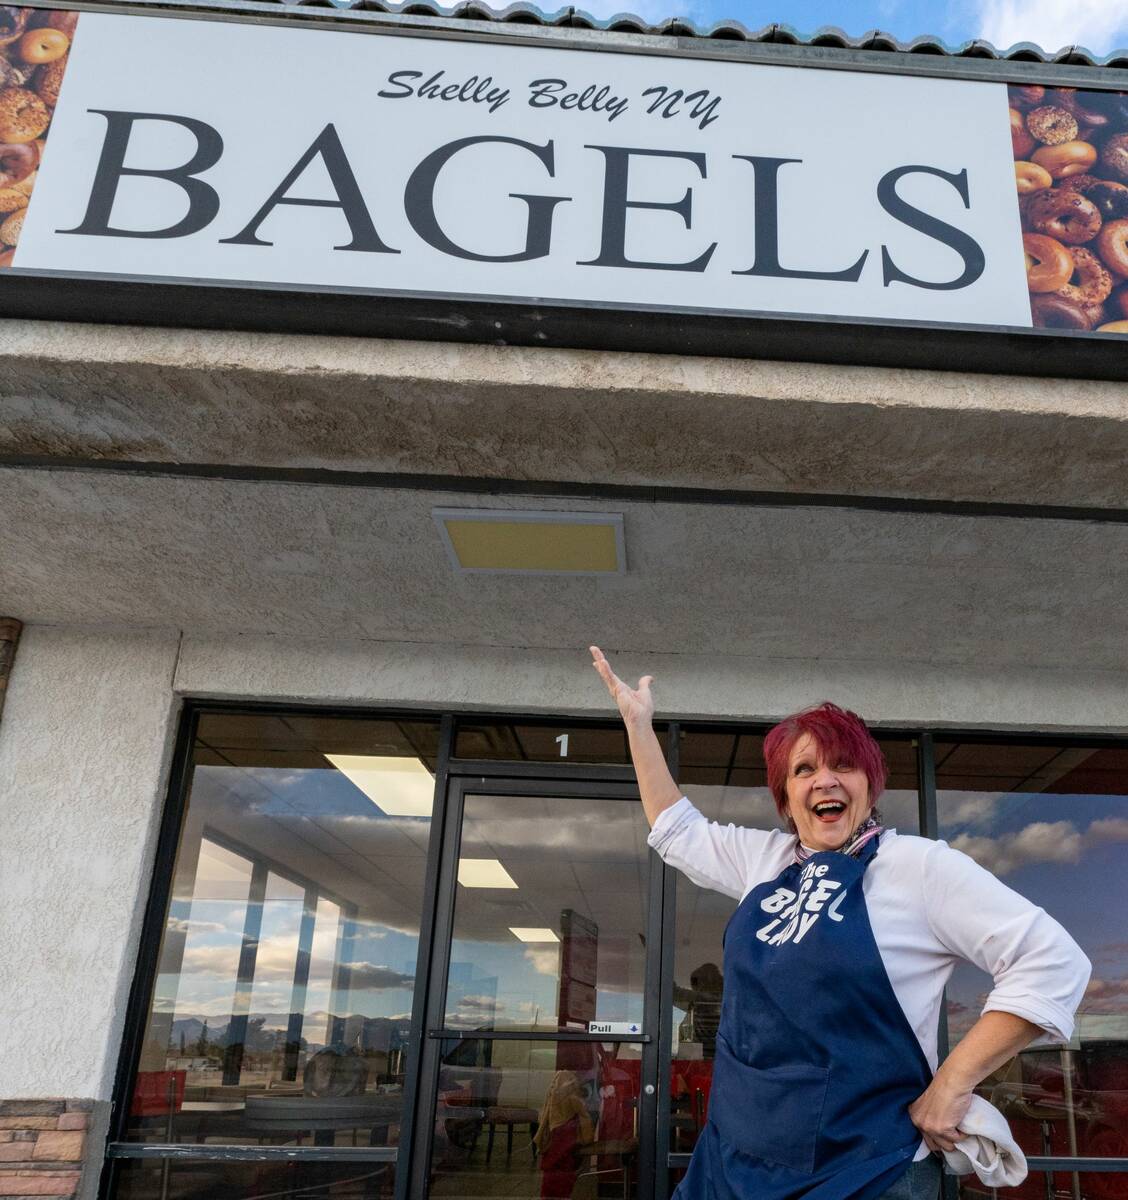 John Clausen/Pahrump Valley Times Shelly Fisher stands in front of her new Shelly Belly NY Bage ...